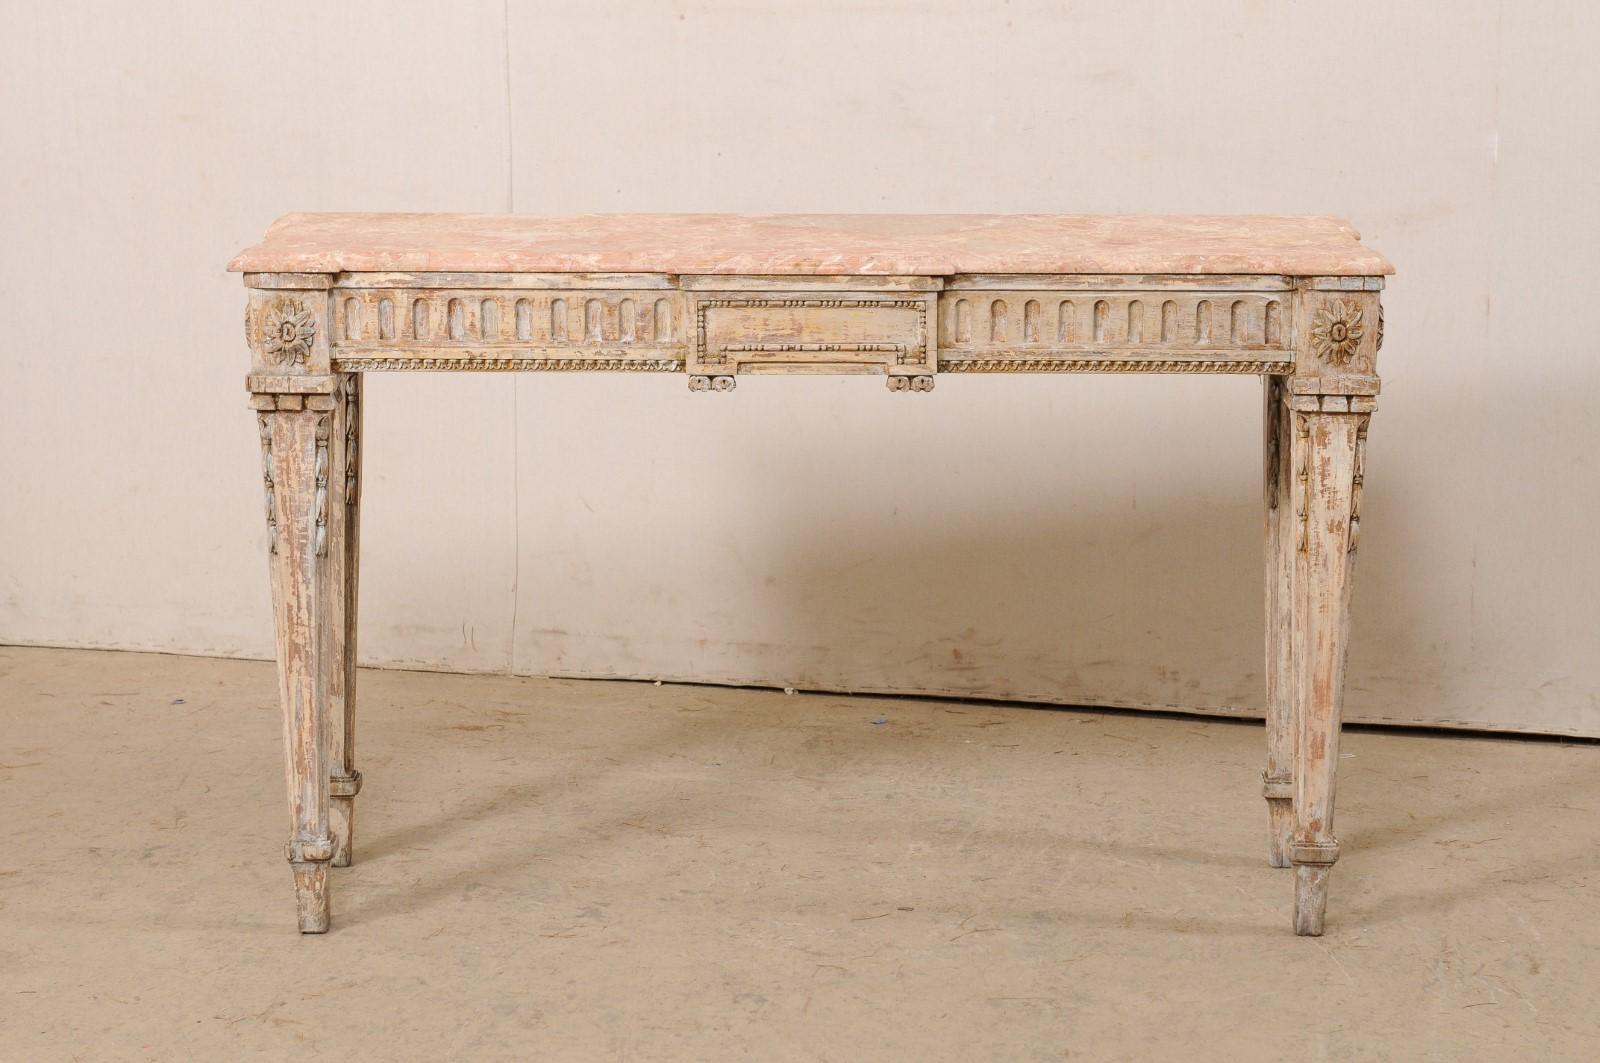 An Italian nicely carved wood console table, with its original marble top, from the 19th century. This antique table from Italy features its original coral colored marble top, which is primarily long, and rectangular with a subtle break-front design